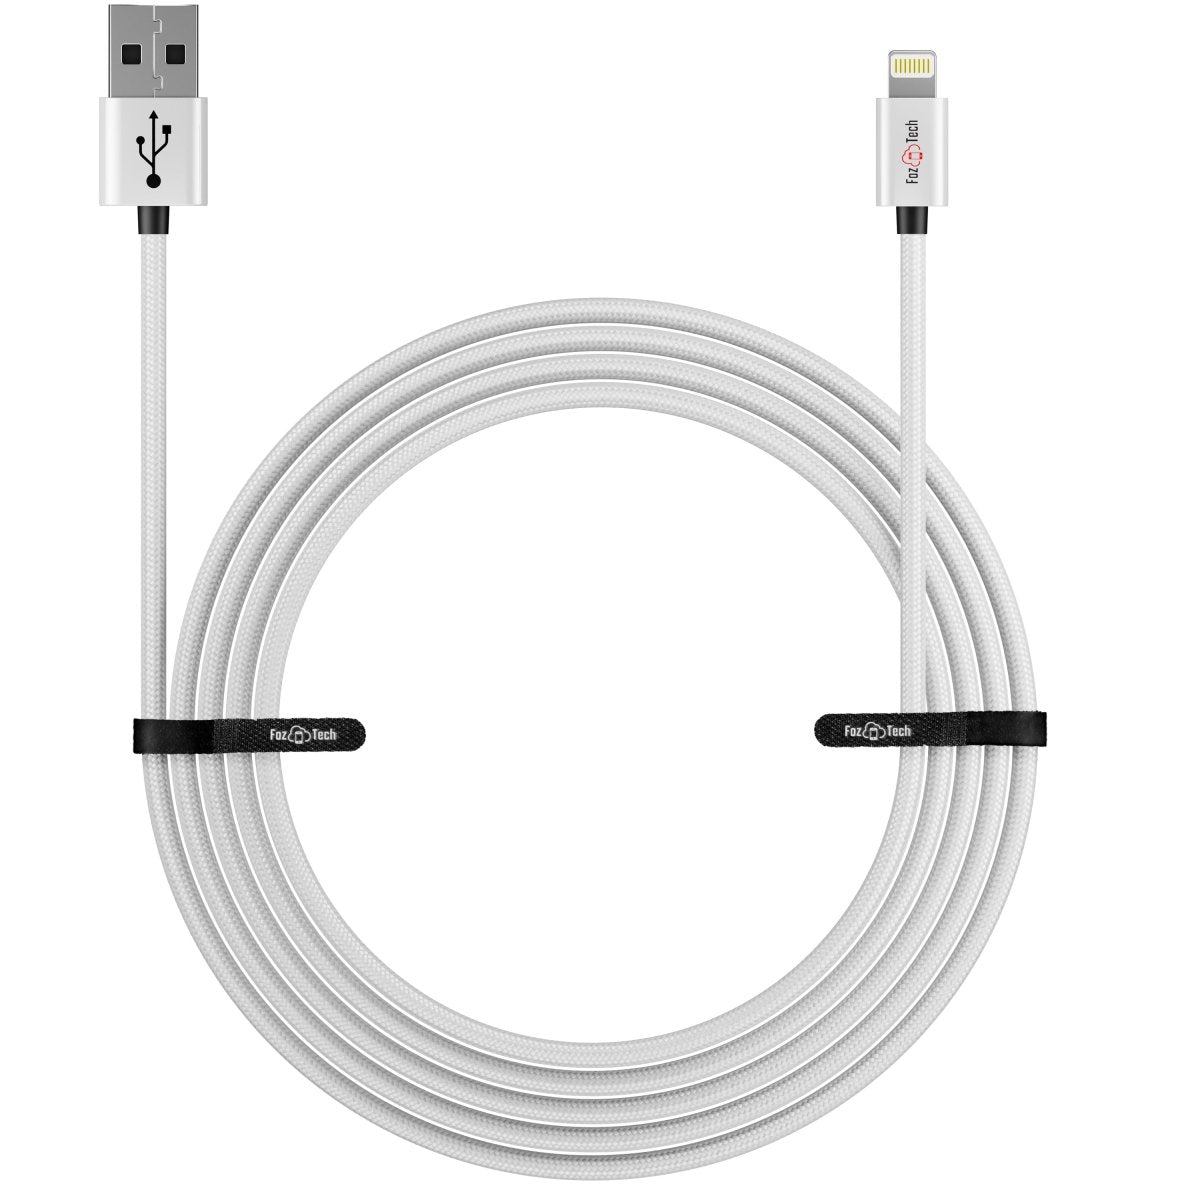 FozTech - CORE Series - USB Charger Cable Data Sync Lead for iPhone, iPad, iPod - Silver - USB Cable - FozTech Official Store